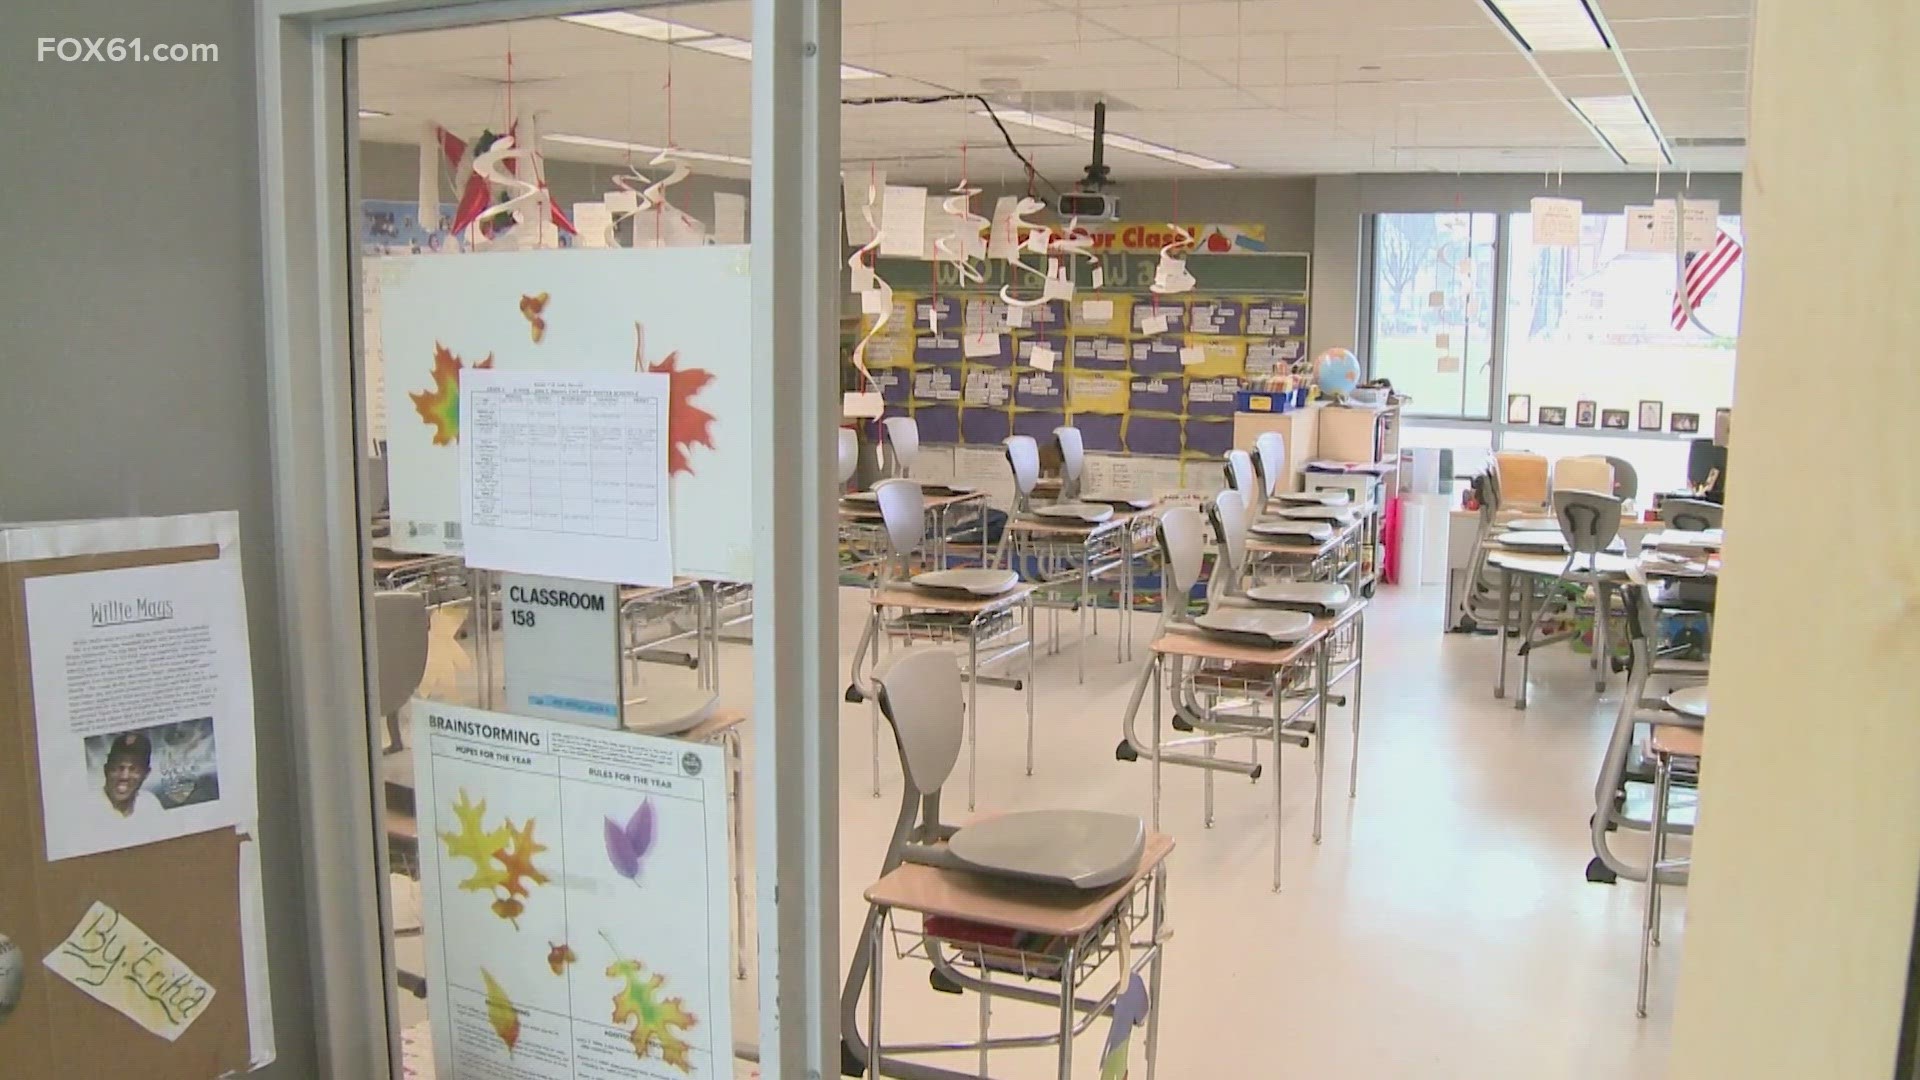 Schools across the country are scrambling to find teachers and staff as applicant pools are shrinking and people are leaving the profession in growing numbers.